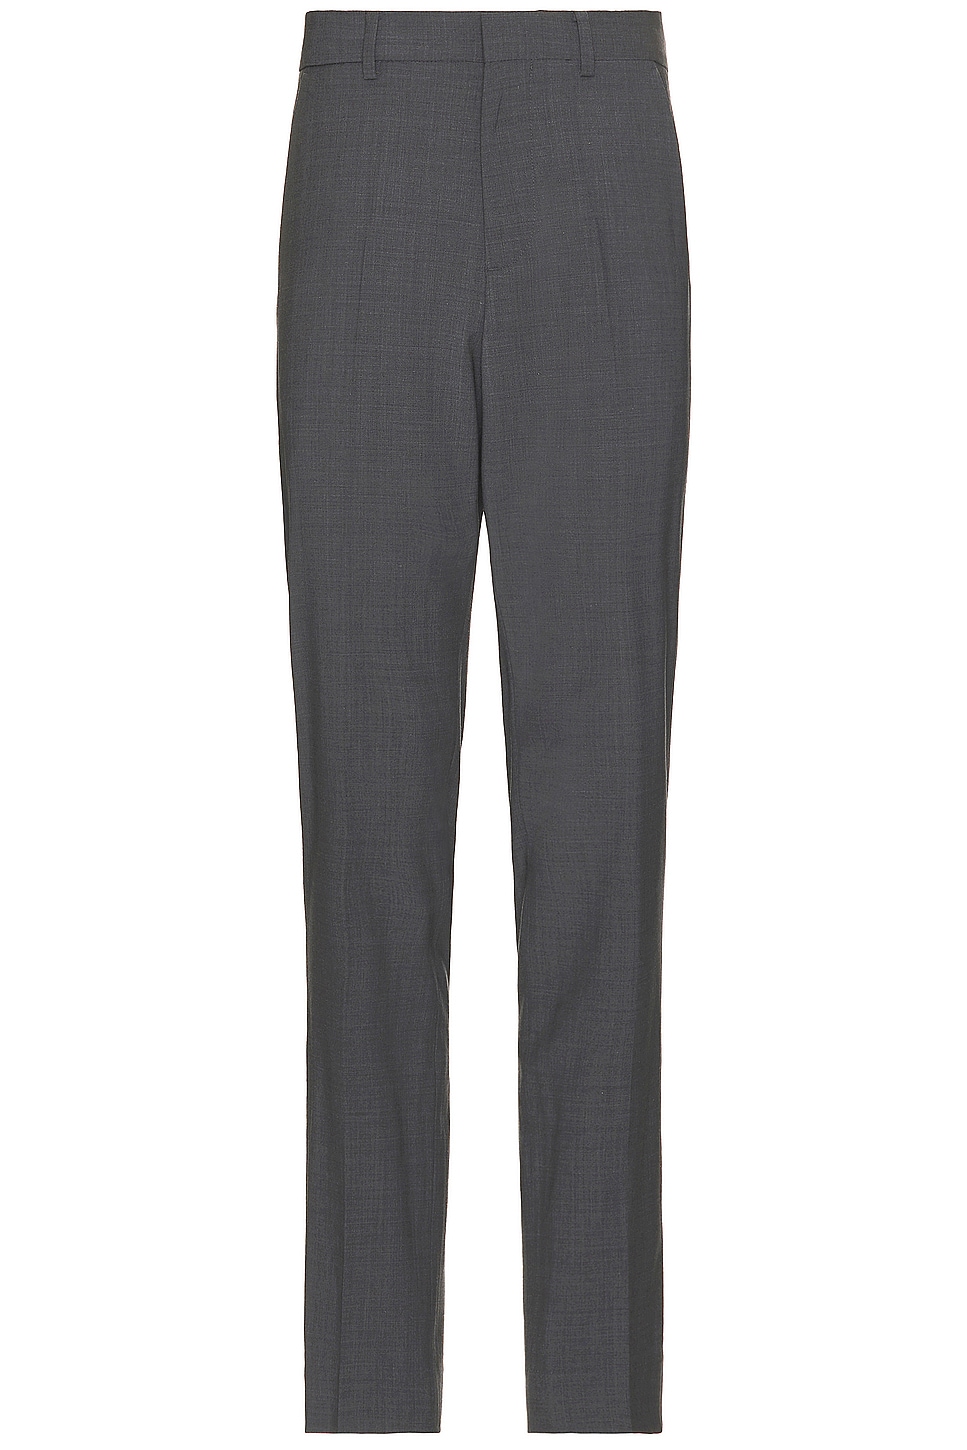 Travel Suit Trouser in Grey